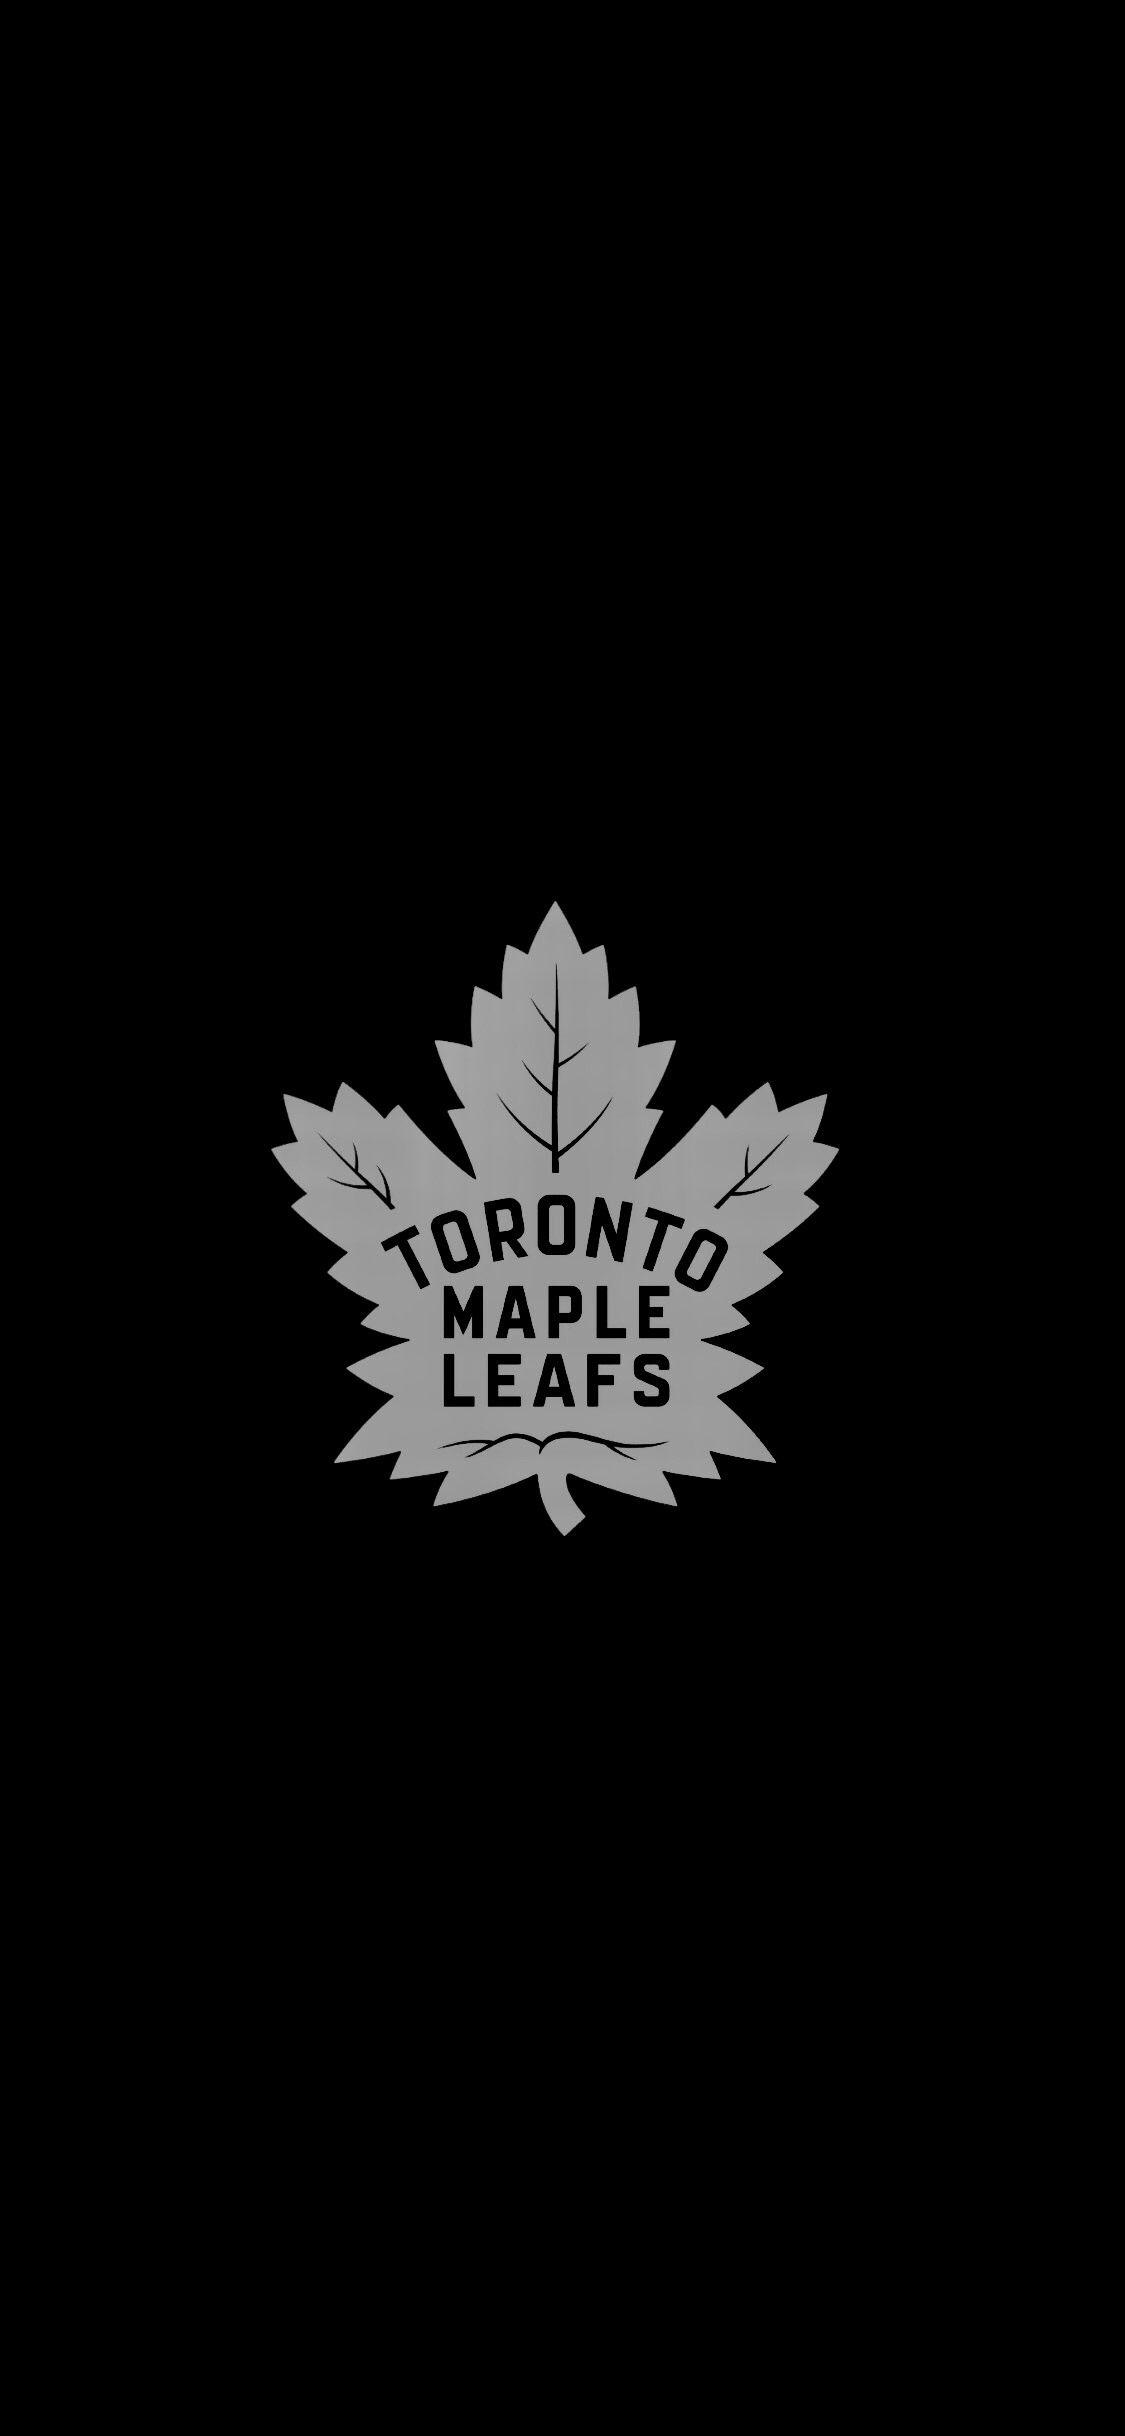 Toronto Maple Leafs Phone Wallpapers Wallpaper Cave